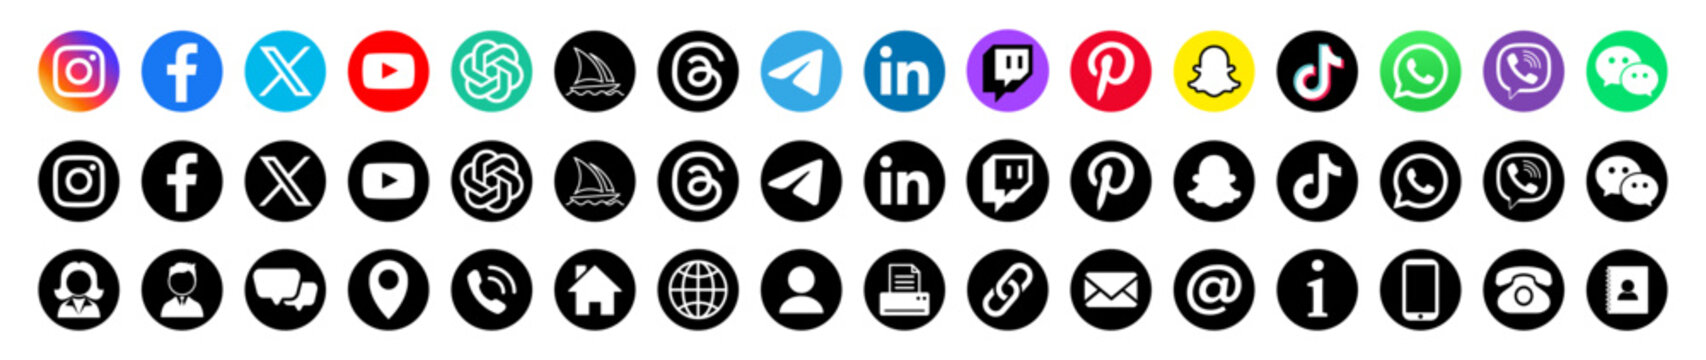 Set of popular social media with contact us icon.Connect Icons.Contact us icon set.Contact and Communication Icons.Set of Communication icon.instagram, facebook, web icons, contact us,call, location,